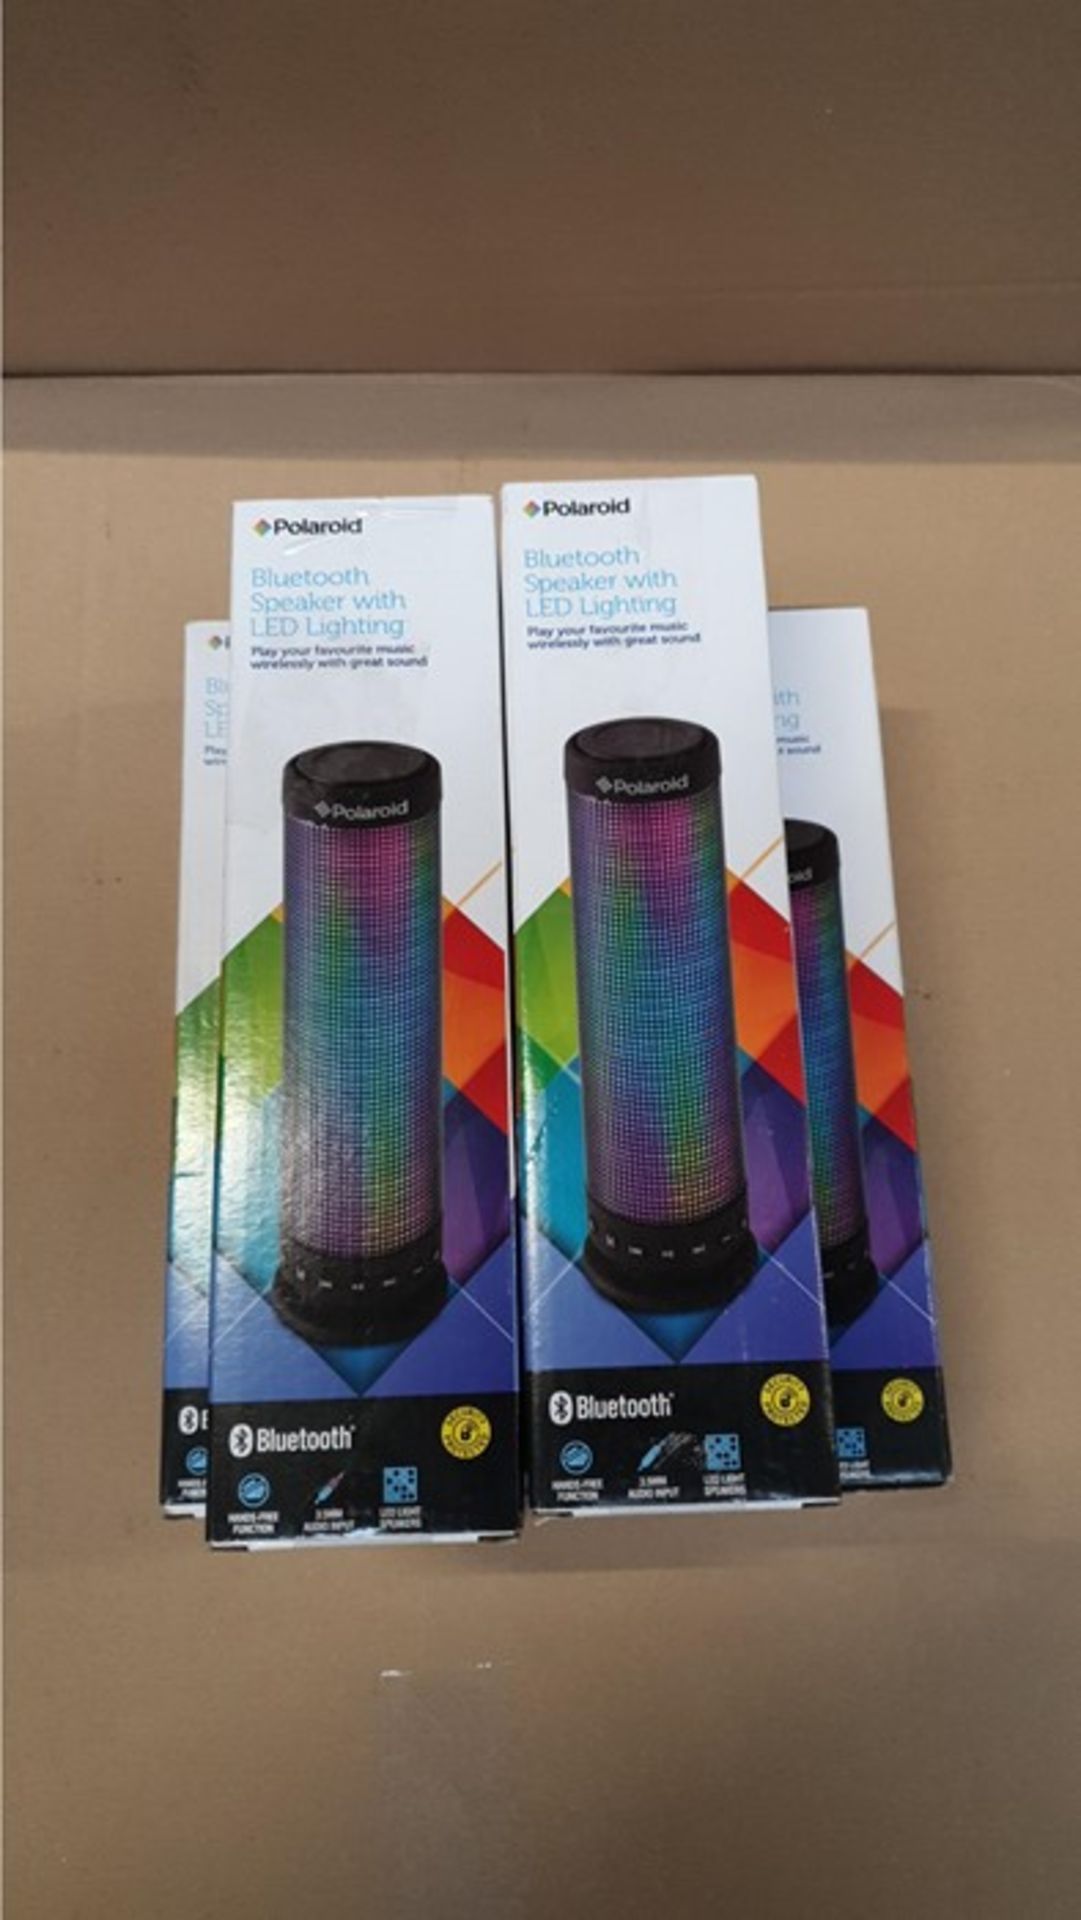 1 LOT TOP CONTAIN 5 BOXED POLAROID BLUETOOTH SPEAKER WITH LED LIGHTENING - BL - 5632 / RRP £94.95 (